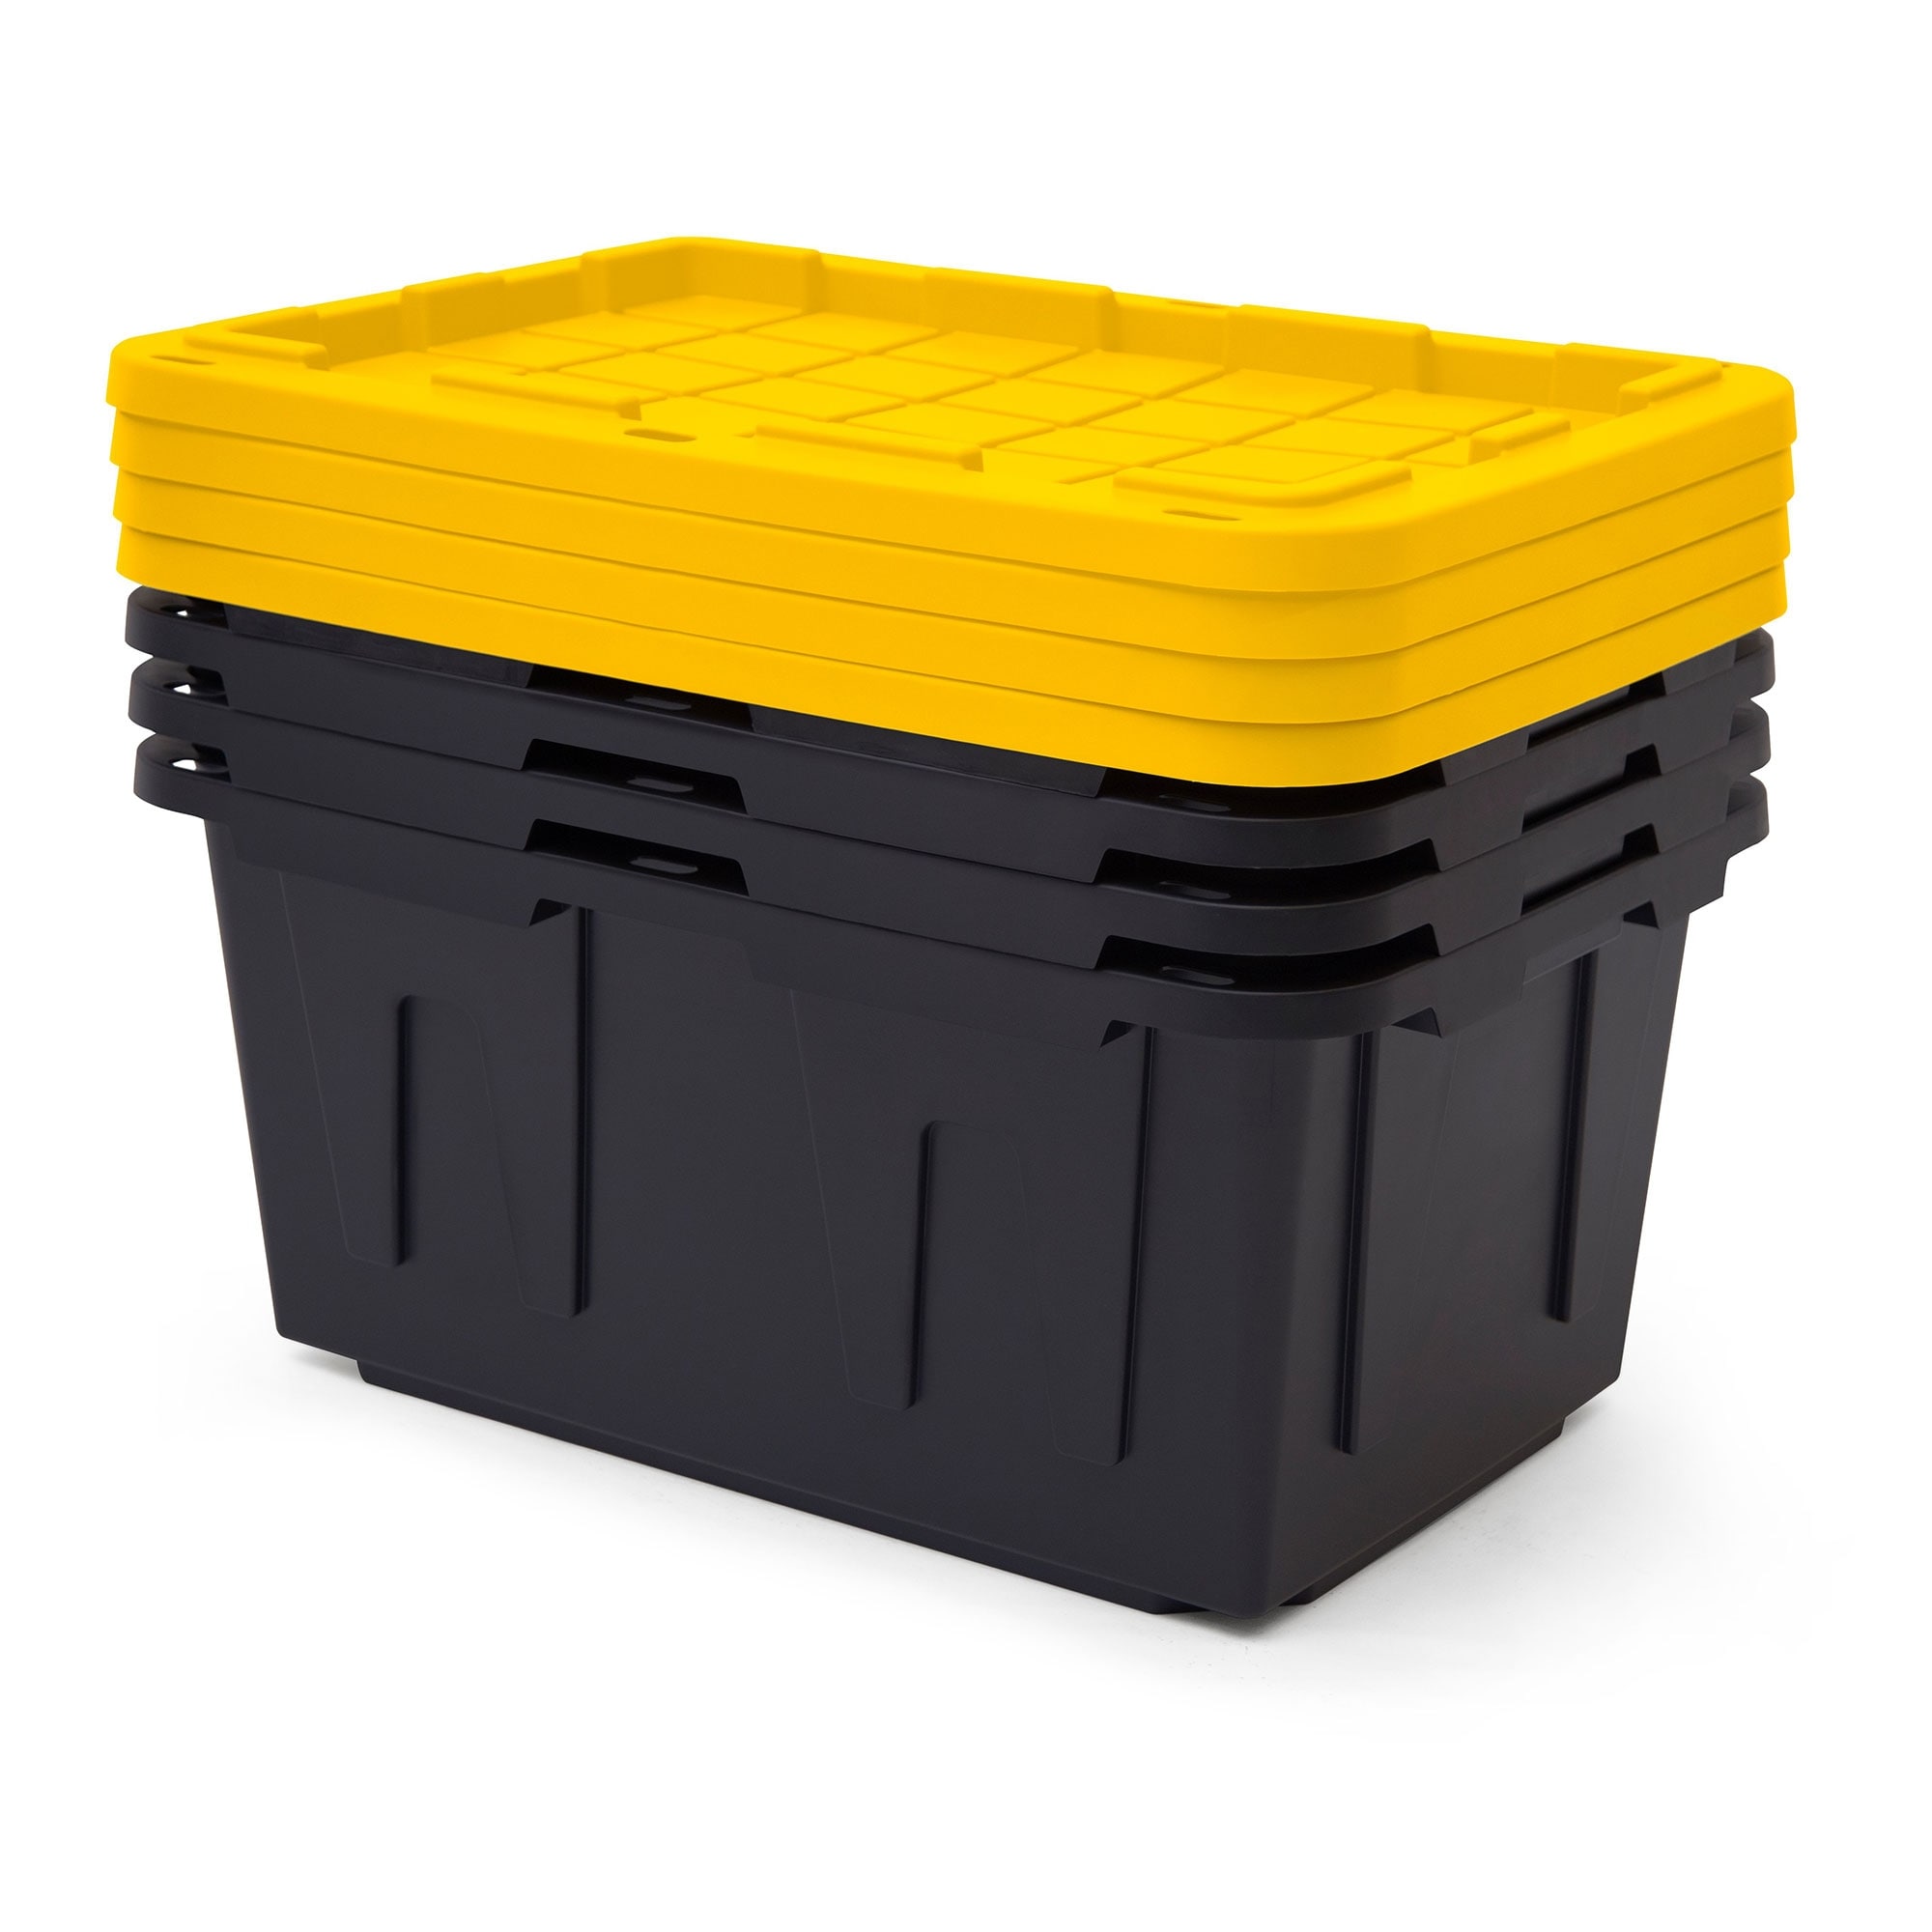 https://ak1.ostkcdn.com/images/products/is/images/direct/89daf32389cd9e86227bf73741d02b1b893b9a8e/TOUGH-BOX-27-Gallon-Stackable-Storage-Totes-with-Lids%2C-Black-and-Yellow-%284-pack%29.jpg